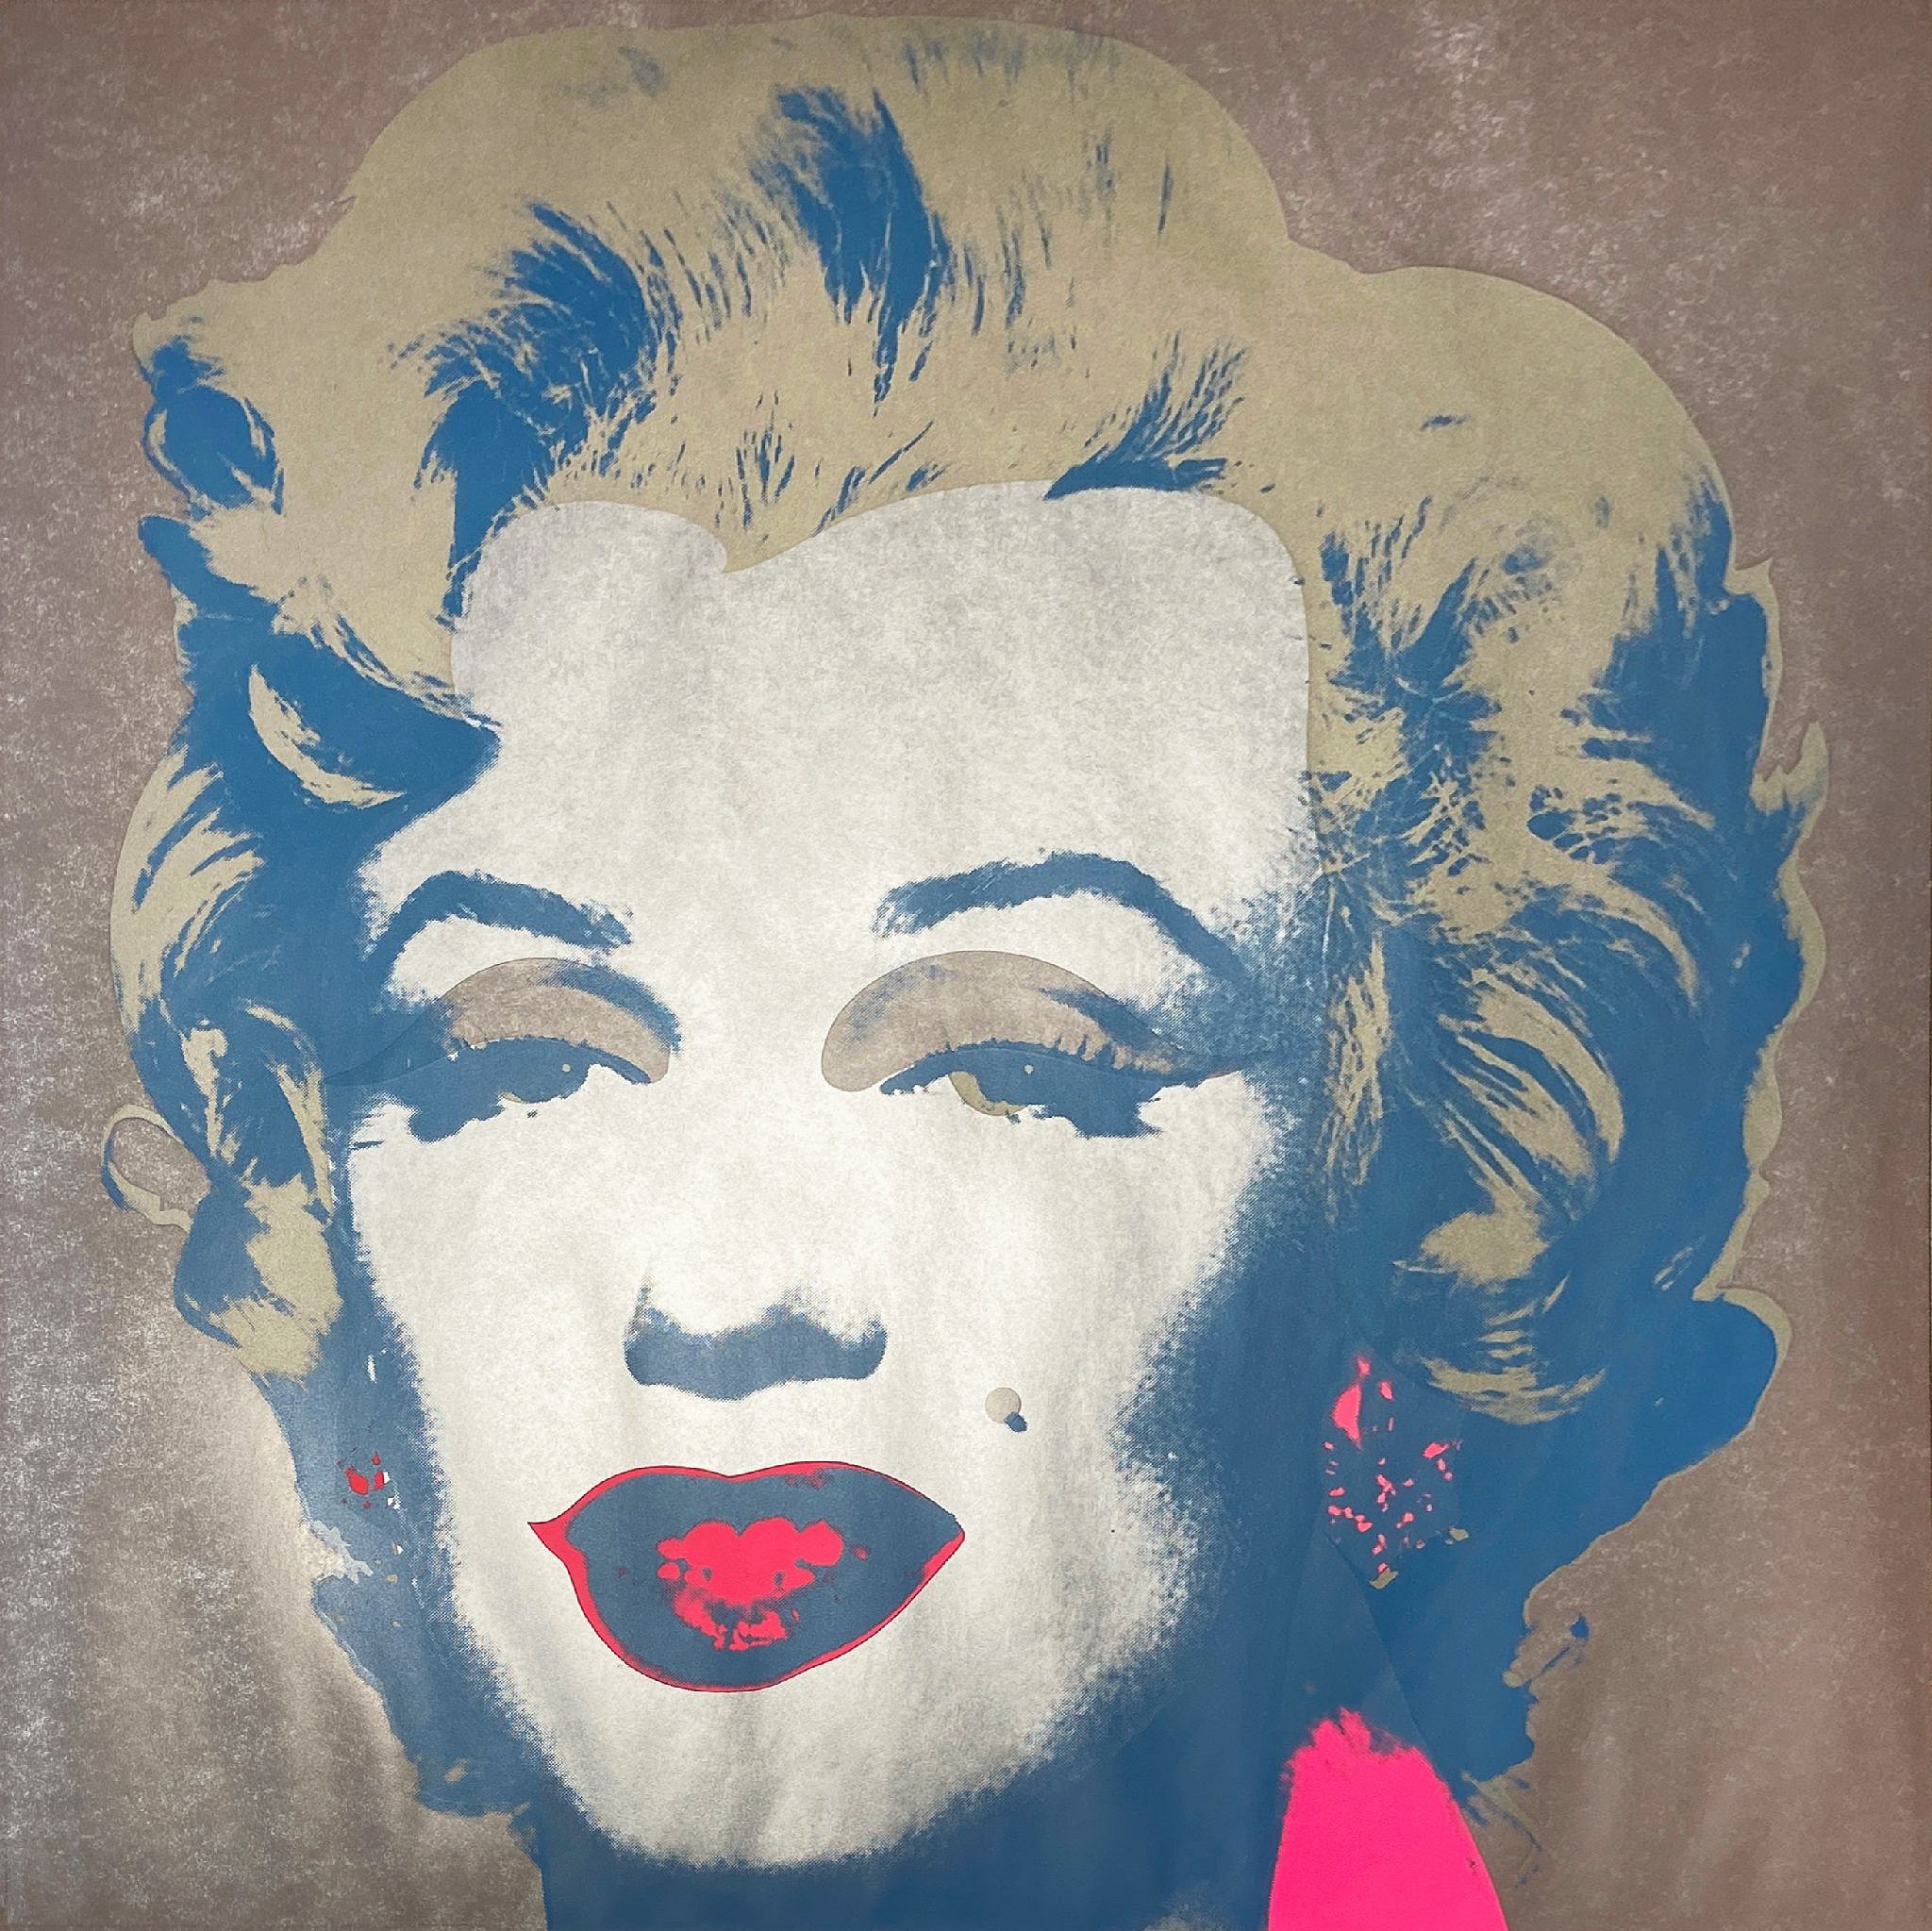 PRESS RELEASE: ANDY WARHOL: Icons, Feb 11 - Mar 14, 2021